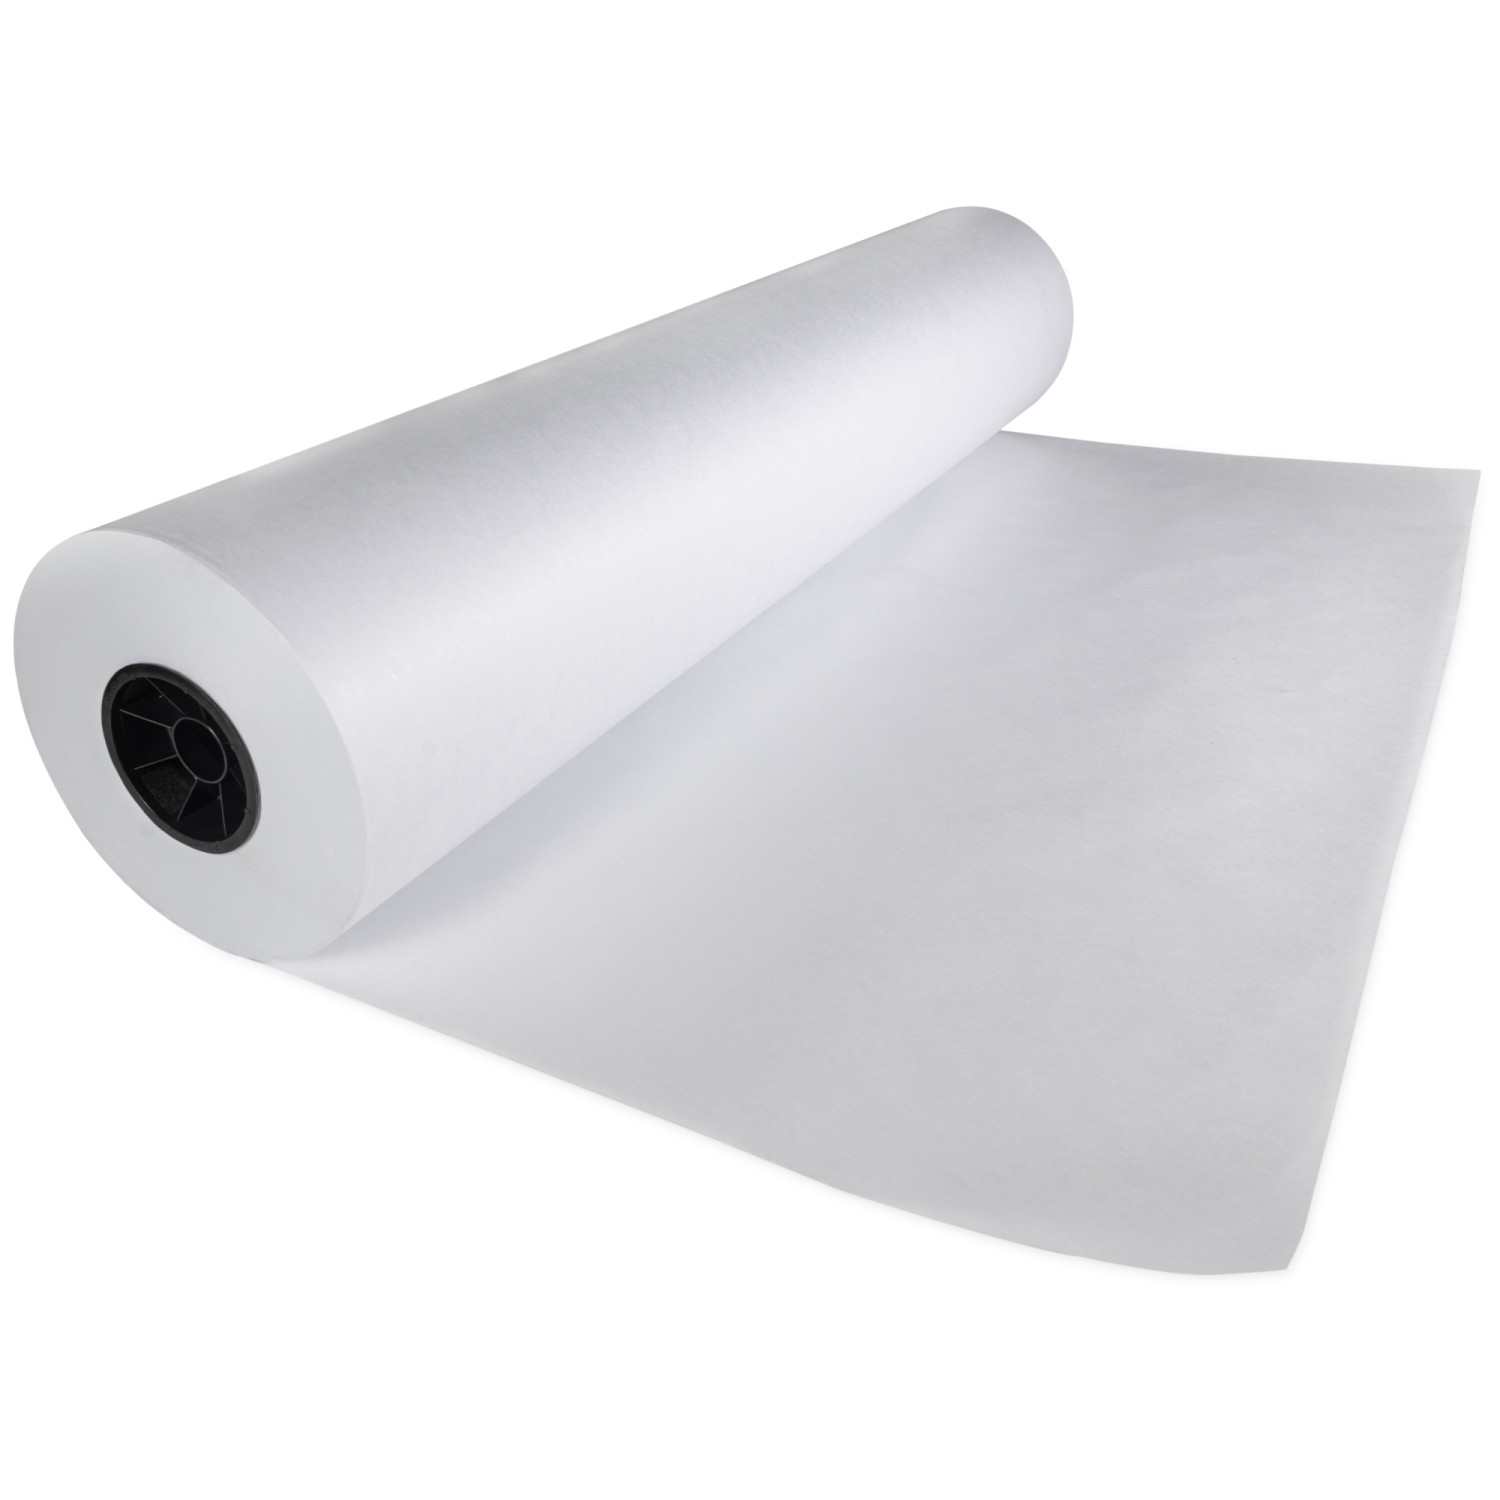 [8 PACK] MG-18 White Butcher Paper Roll 18 x 1000 ft - Roll for Butcher,  Freezer Paper, Food Service, Butcher Paper, Meat Paper, Freezer Roll, BBQ